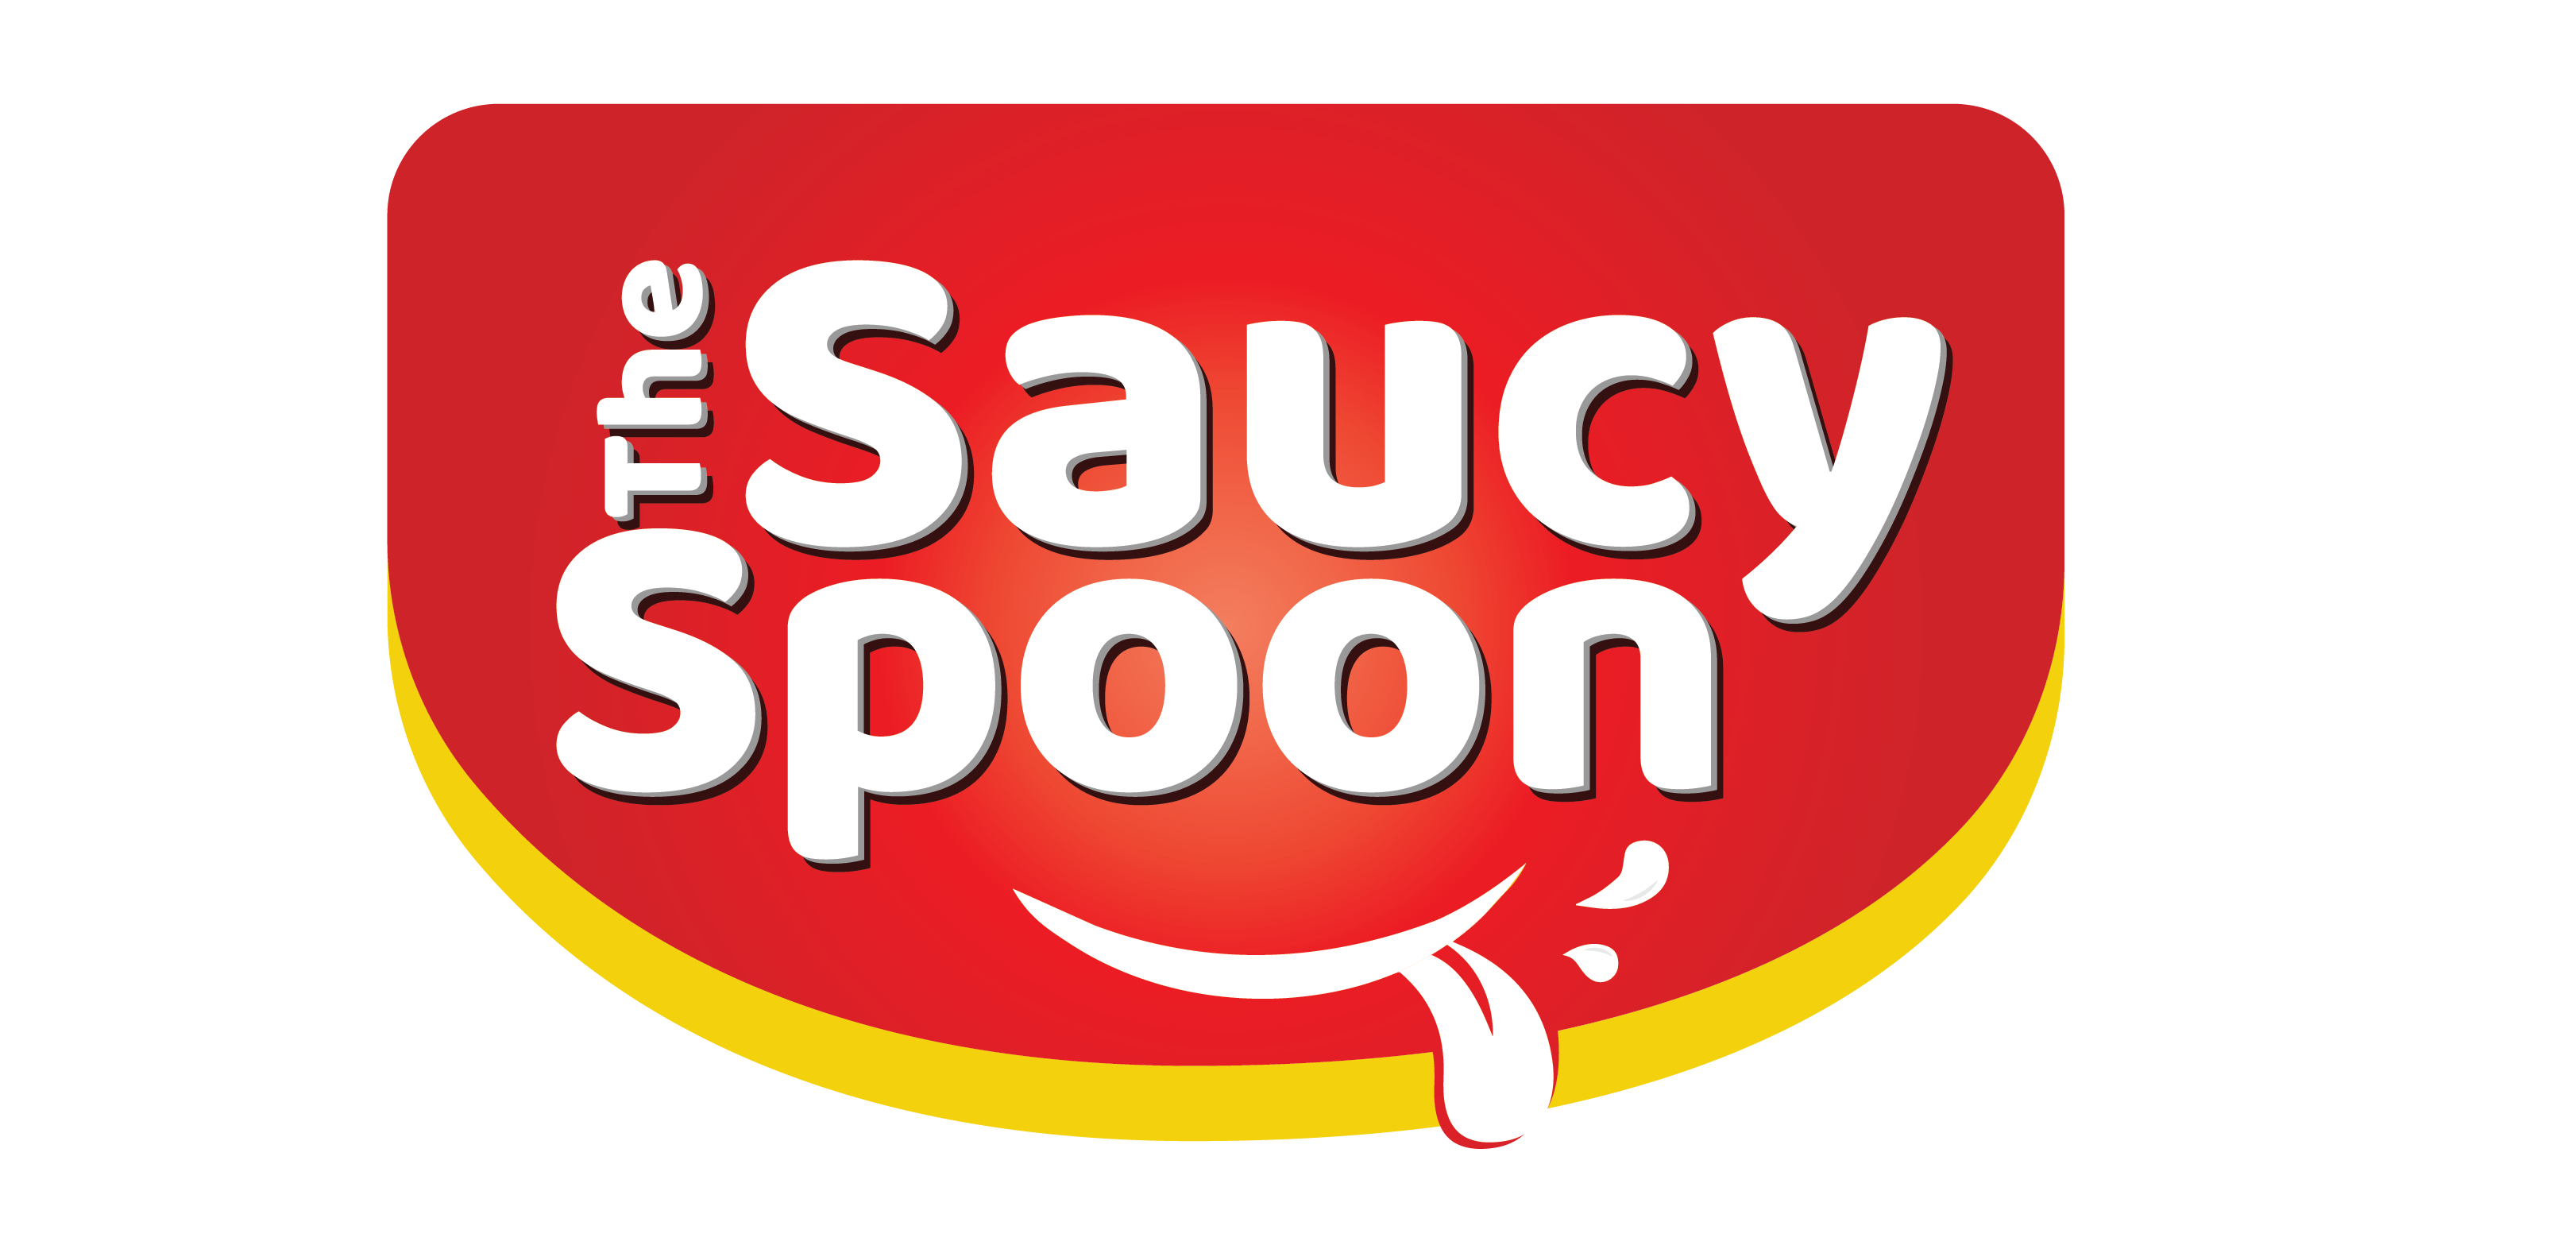  The Saucy Spoon